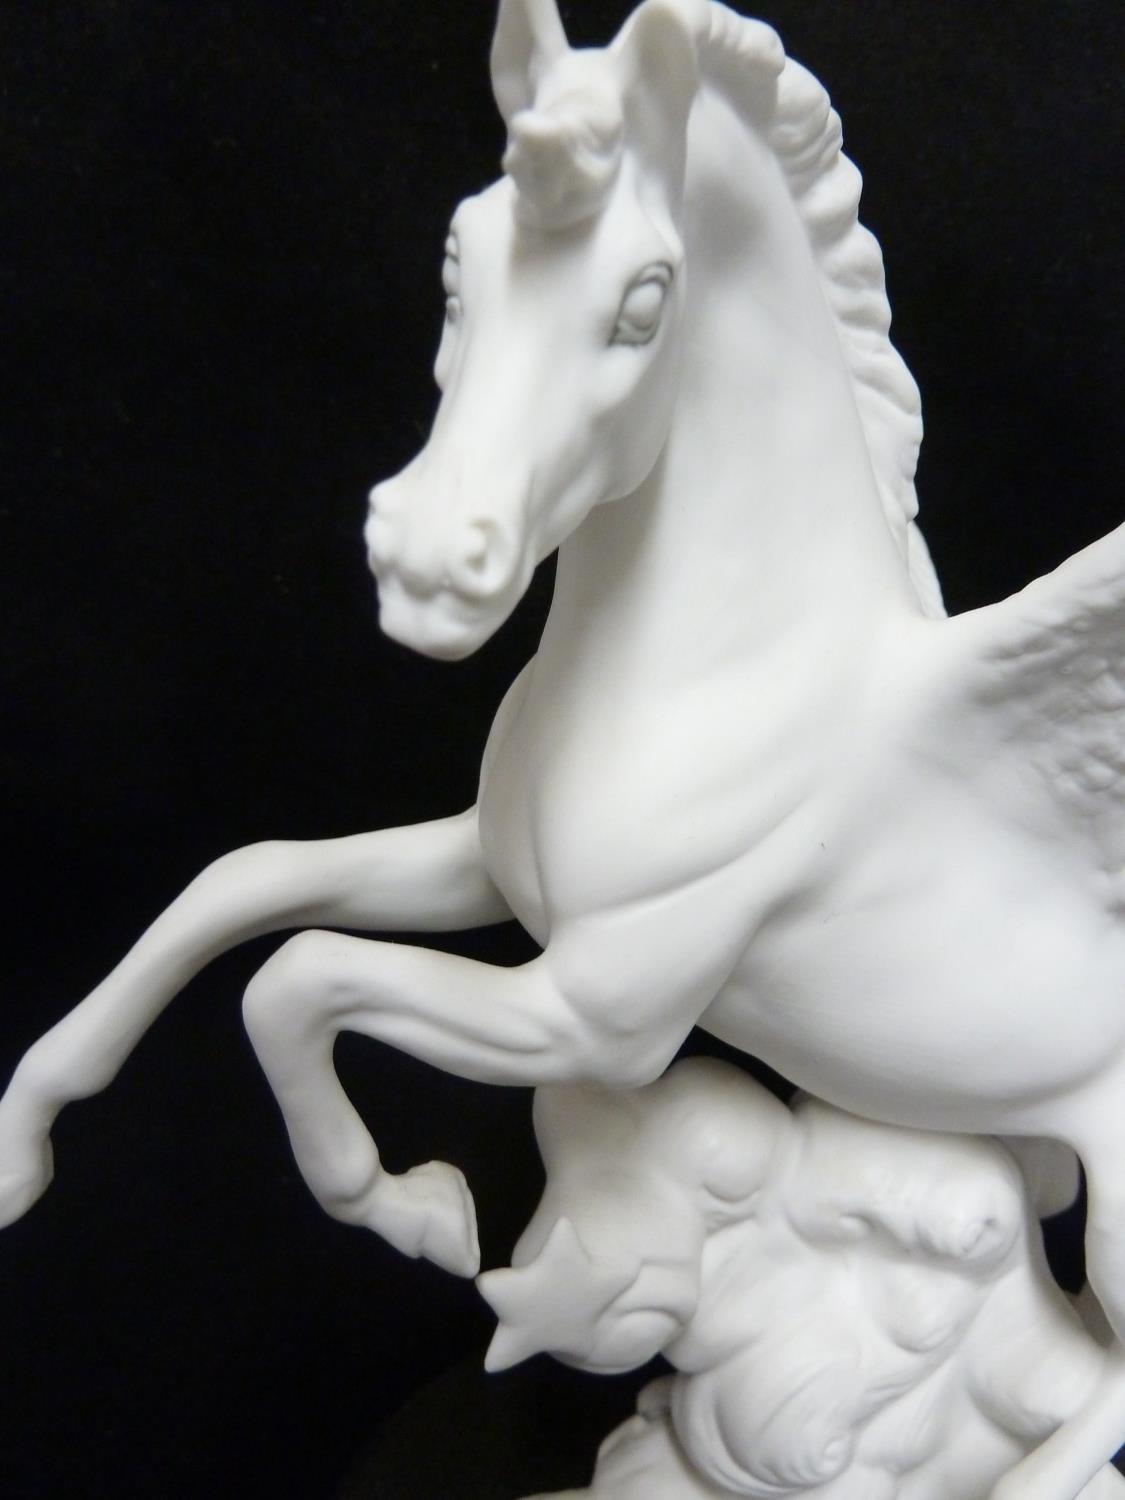 Pegasus - A Royal Doulton figure of a horse with wings atop a cloud with stars, HN3547, together - Image 4 of 5